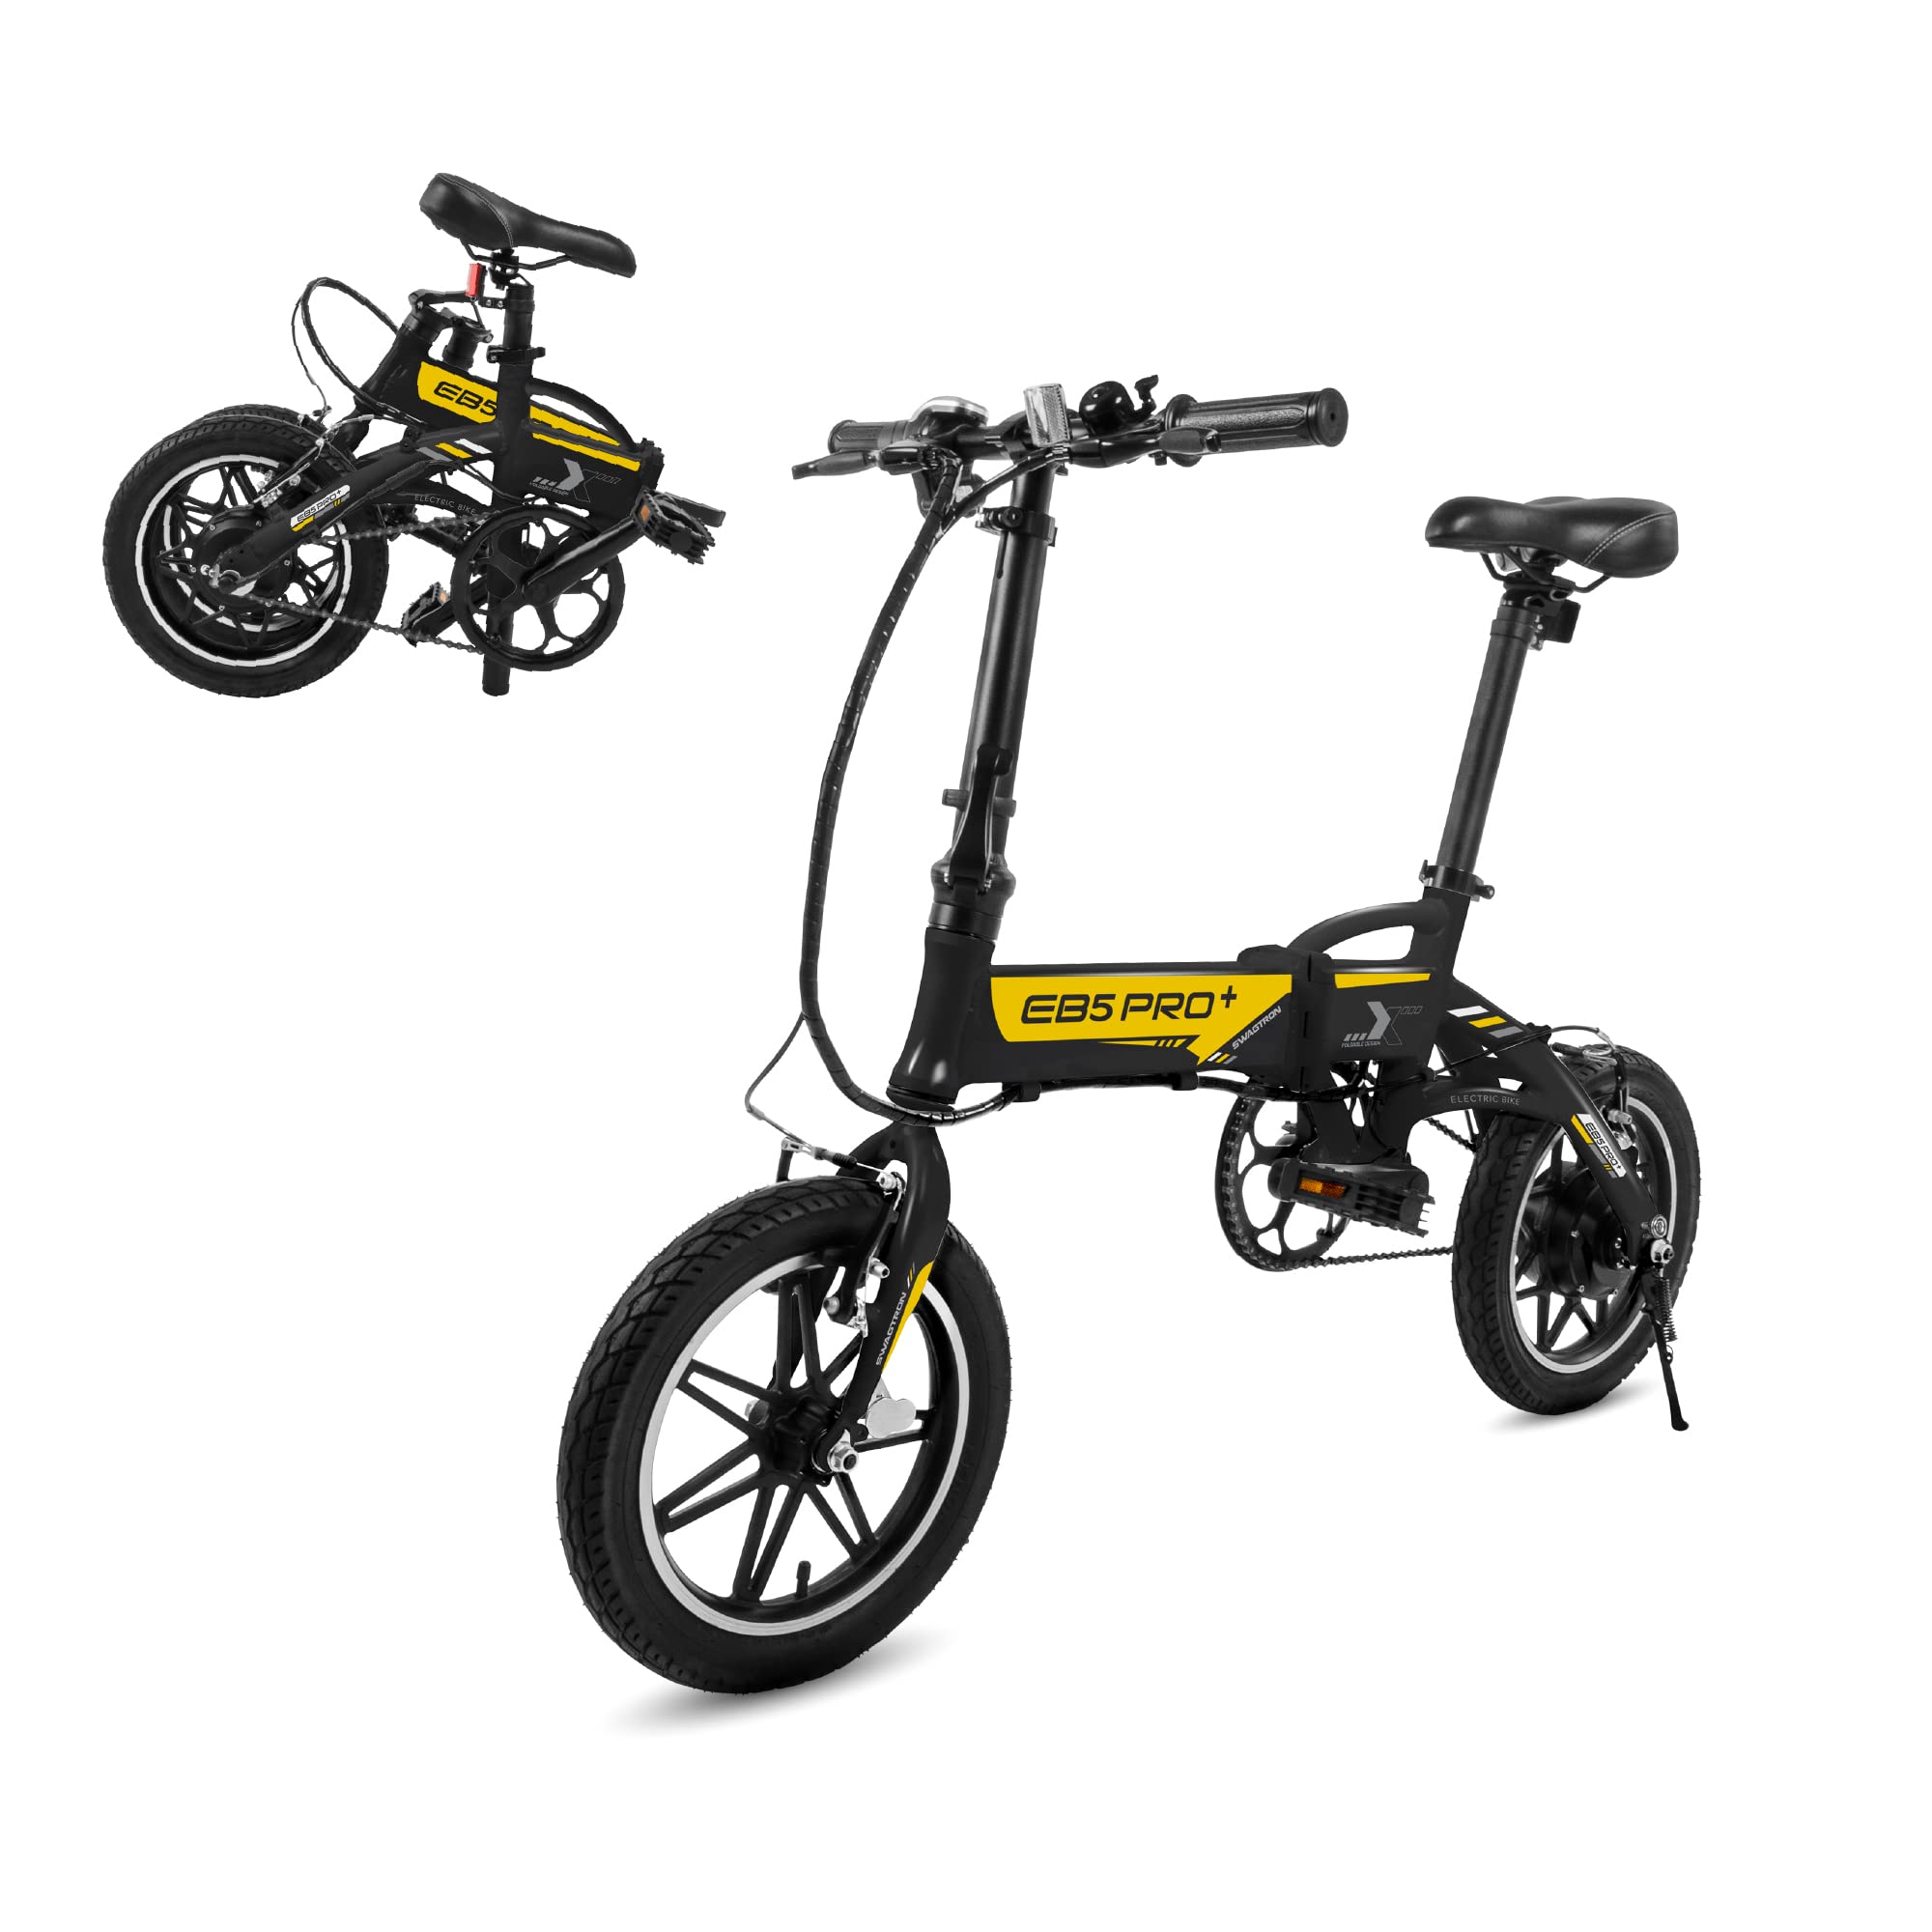 Swagtron Swagcycle EB-5 Lightweight Aluminum Folding Electric Bike with Pedals Black Removable Battery Electric Bike